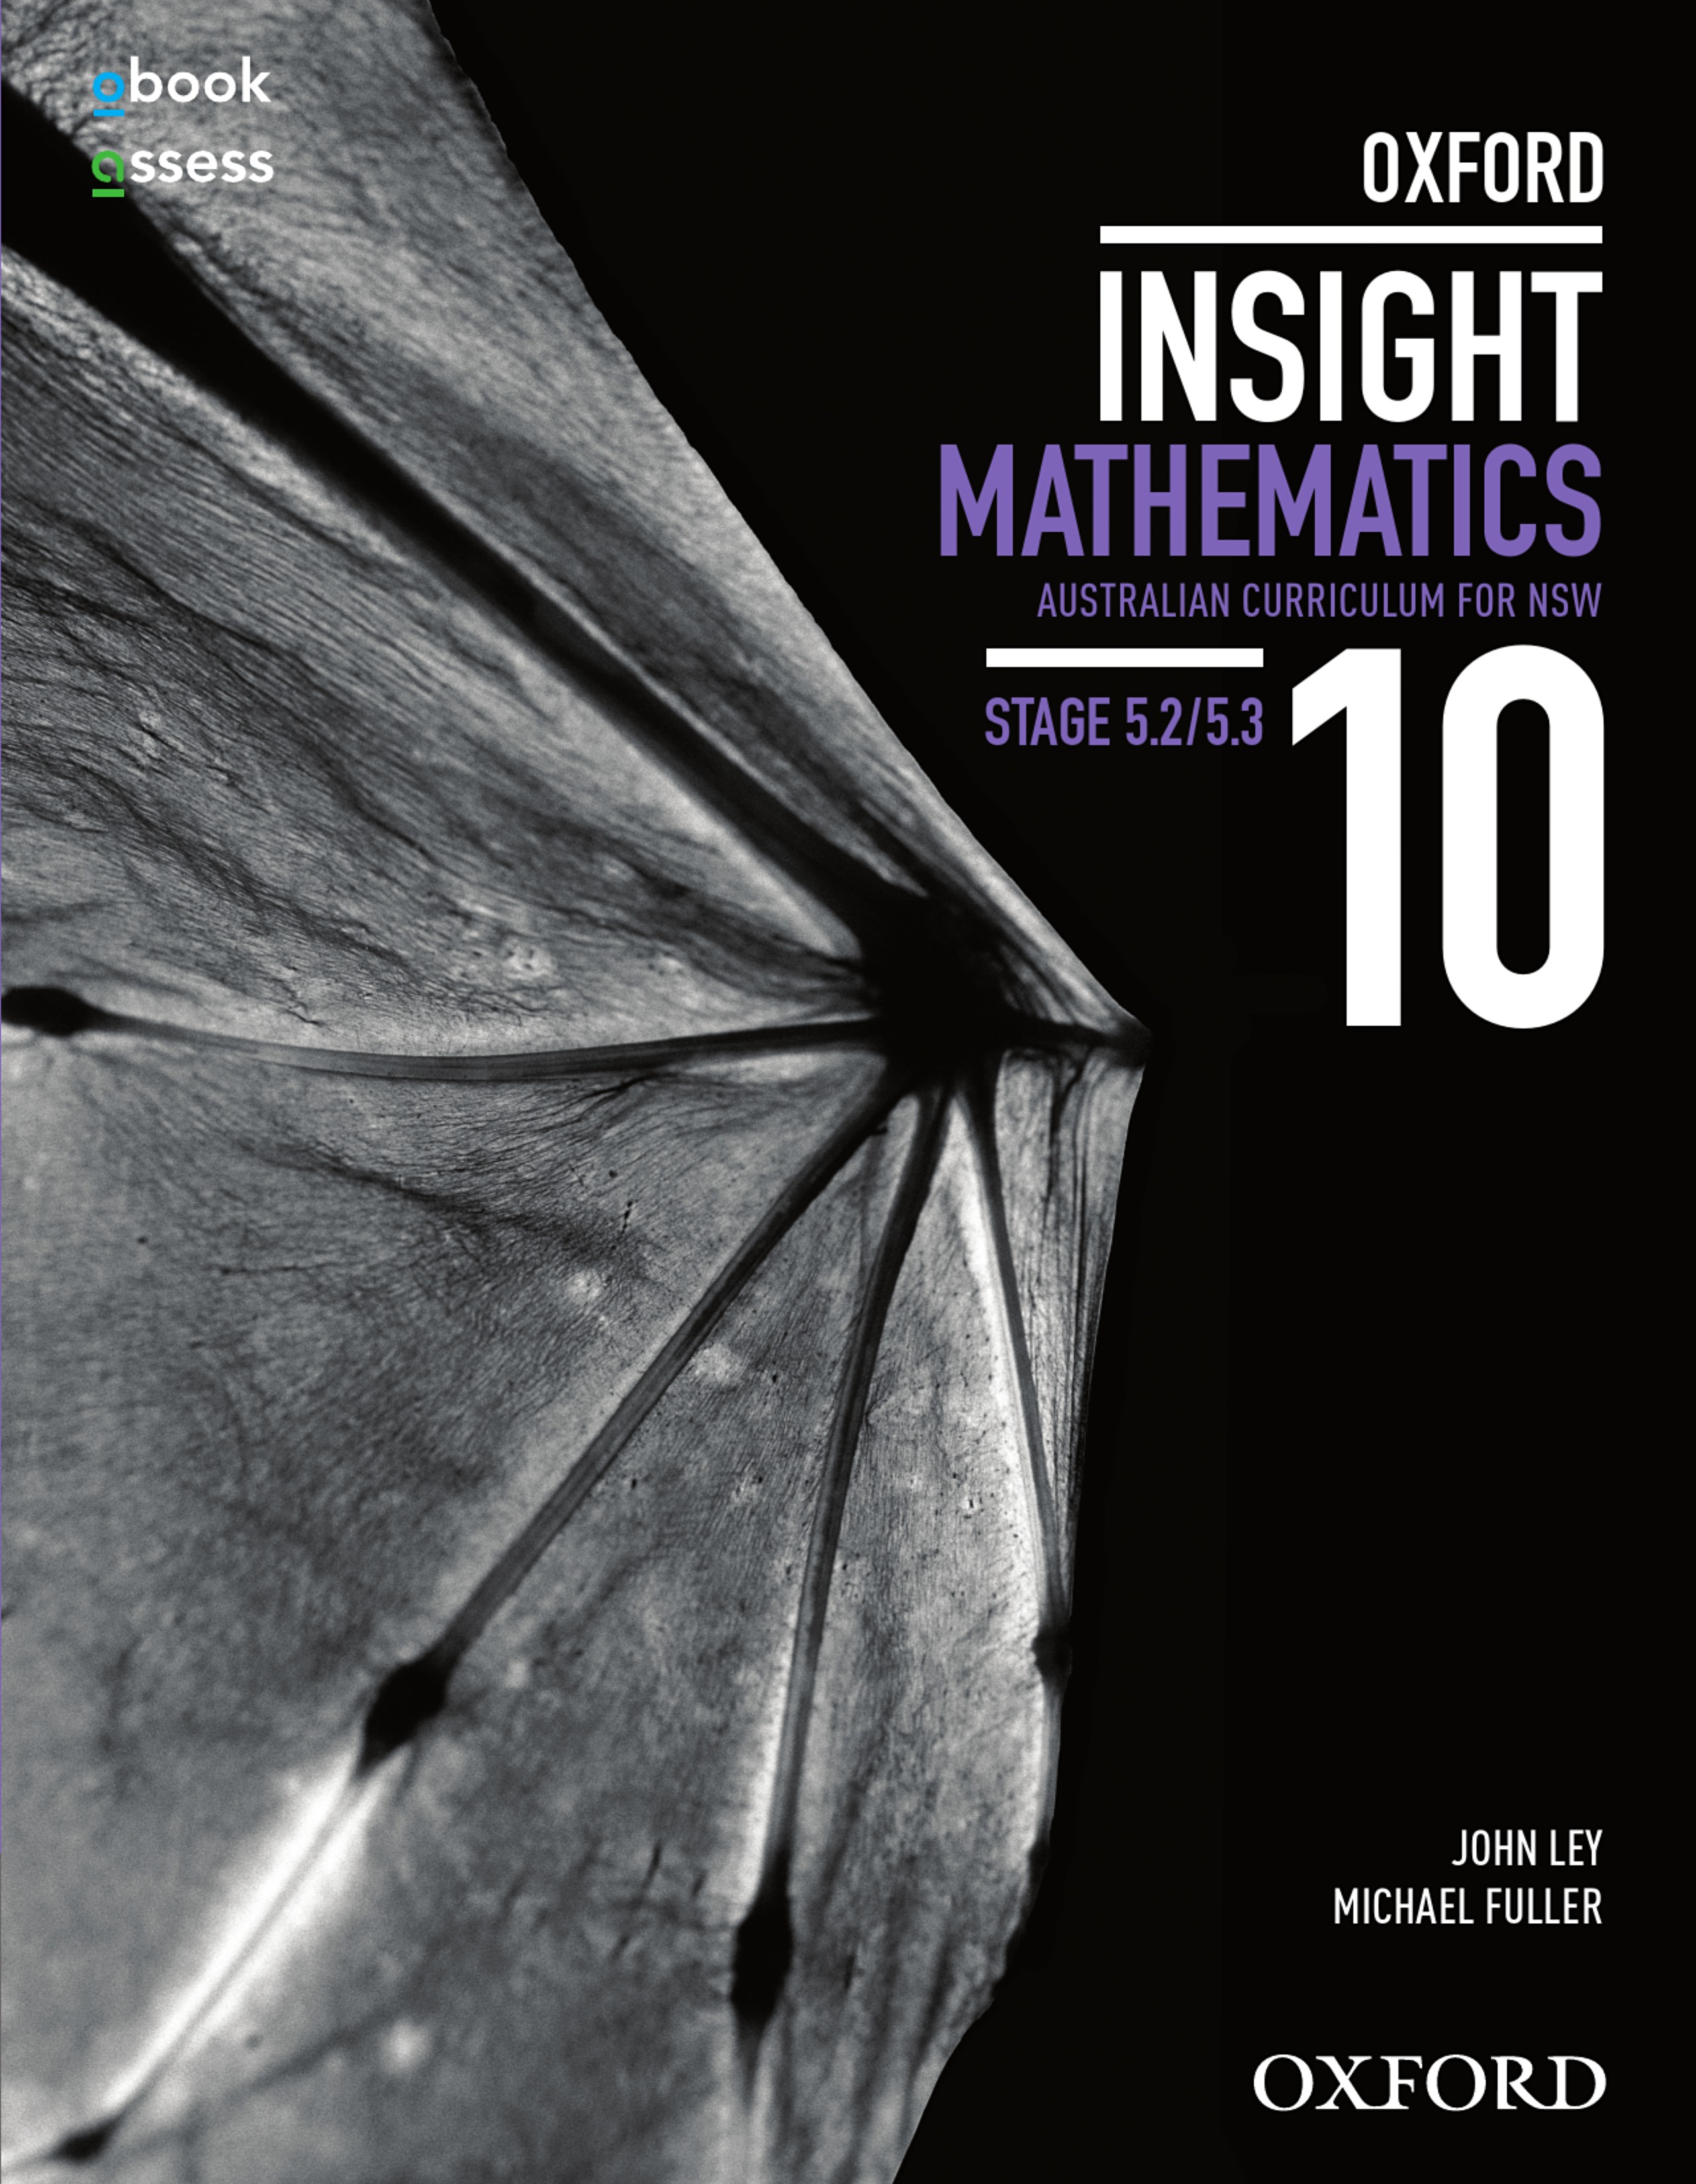 Oxford Insight Mathematics 10 Australian Curriculum for NSW Stages 5.2/5.3